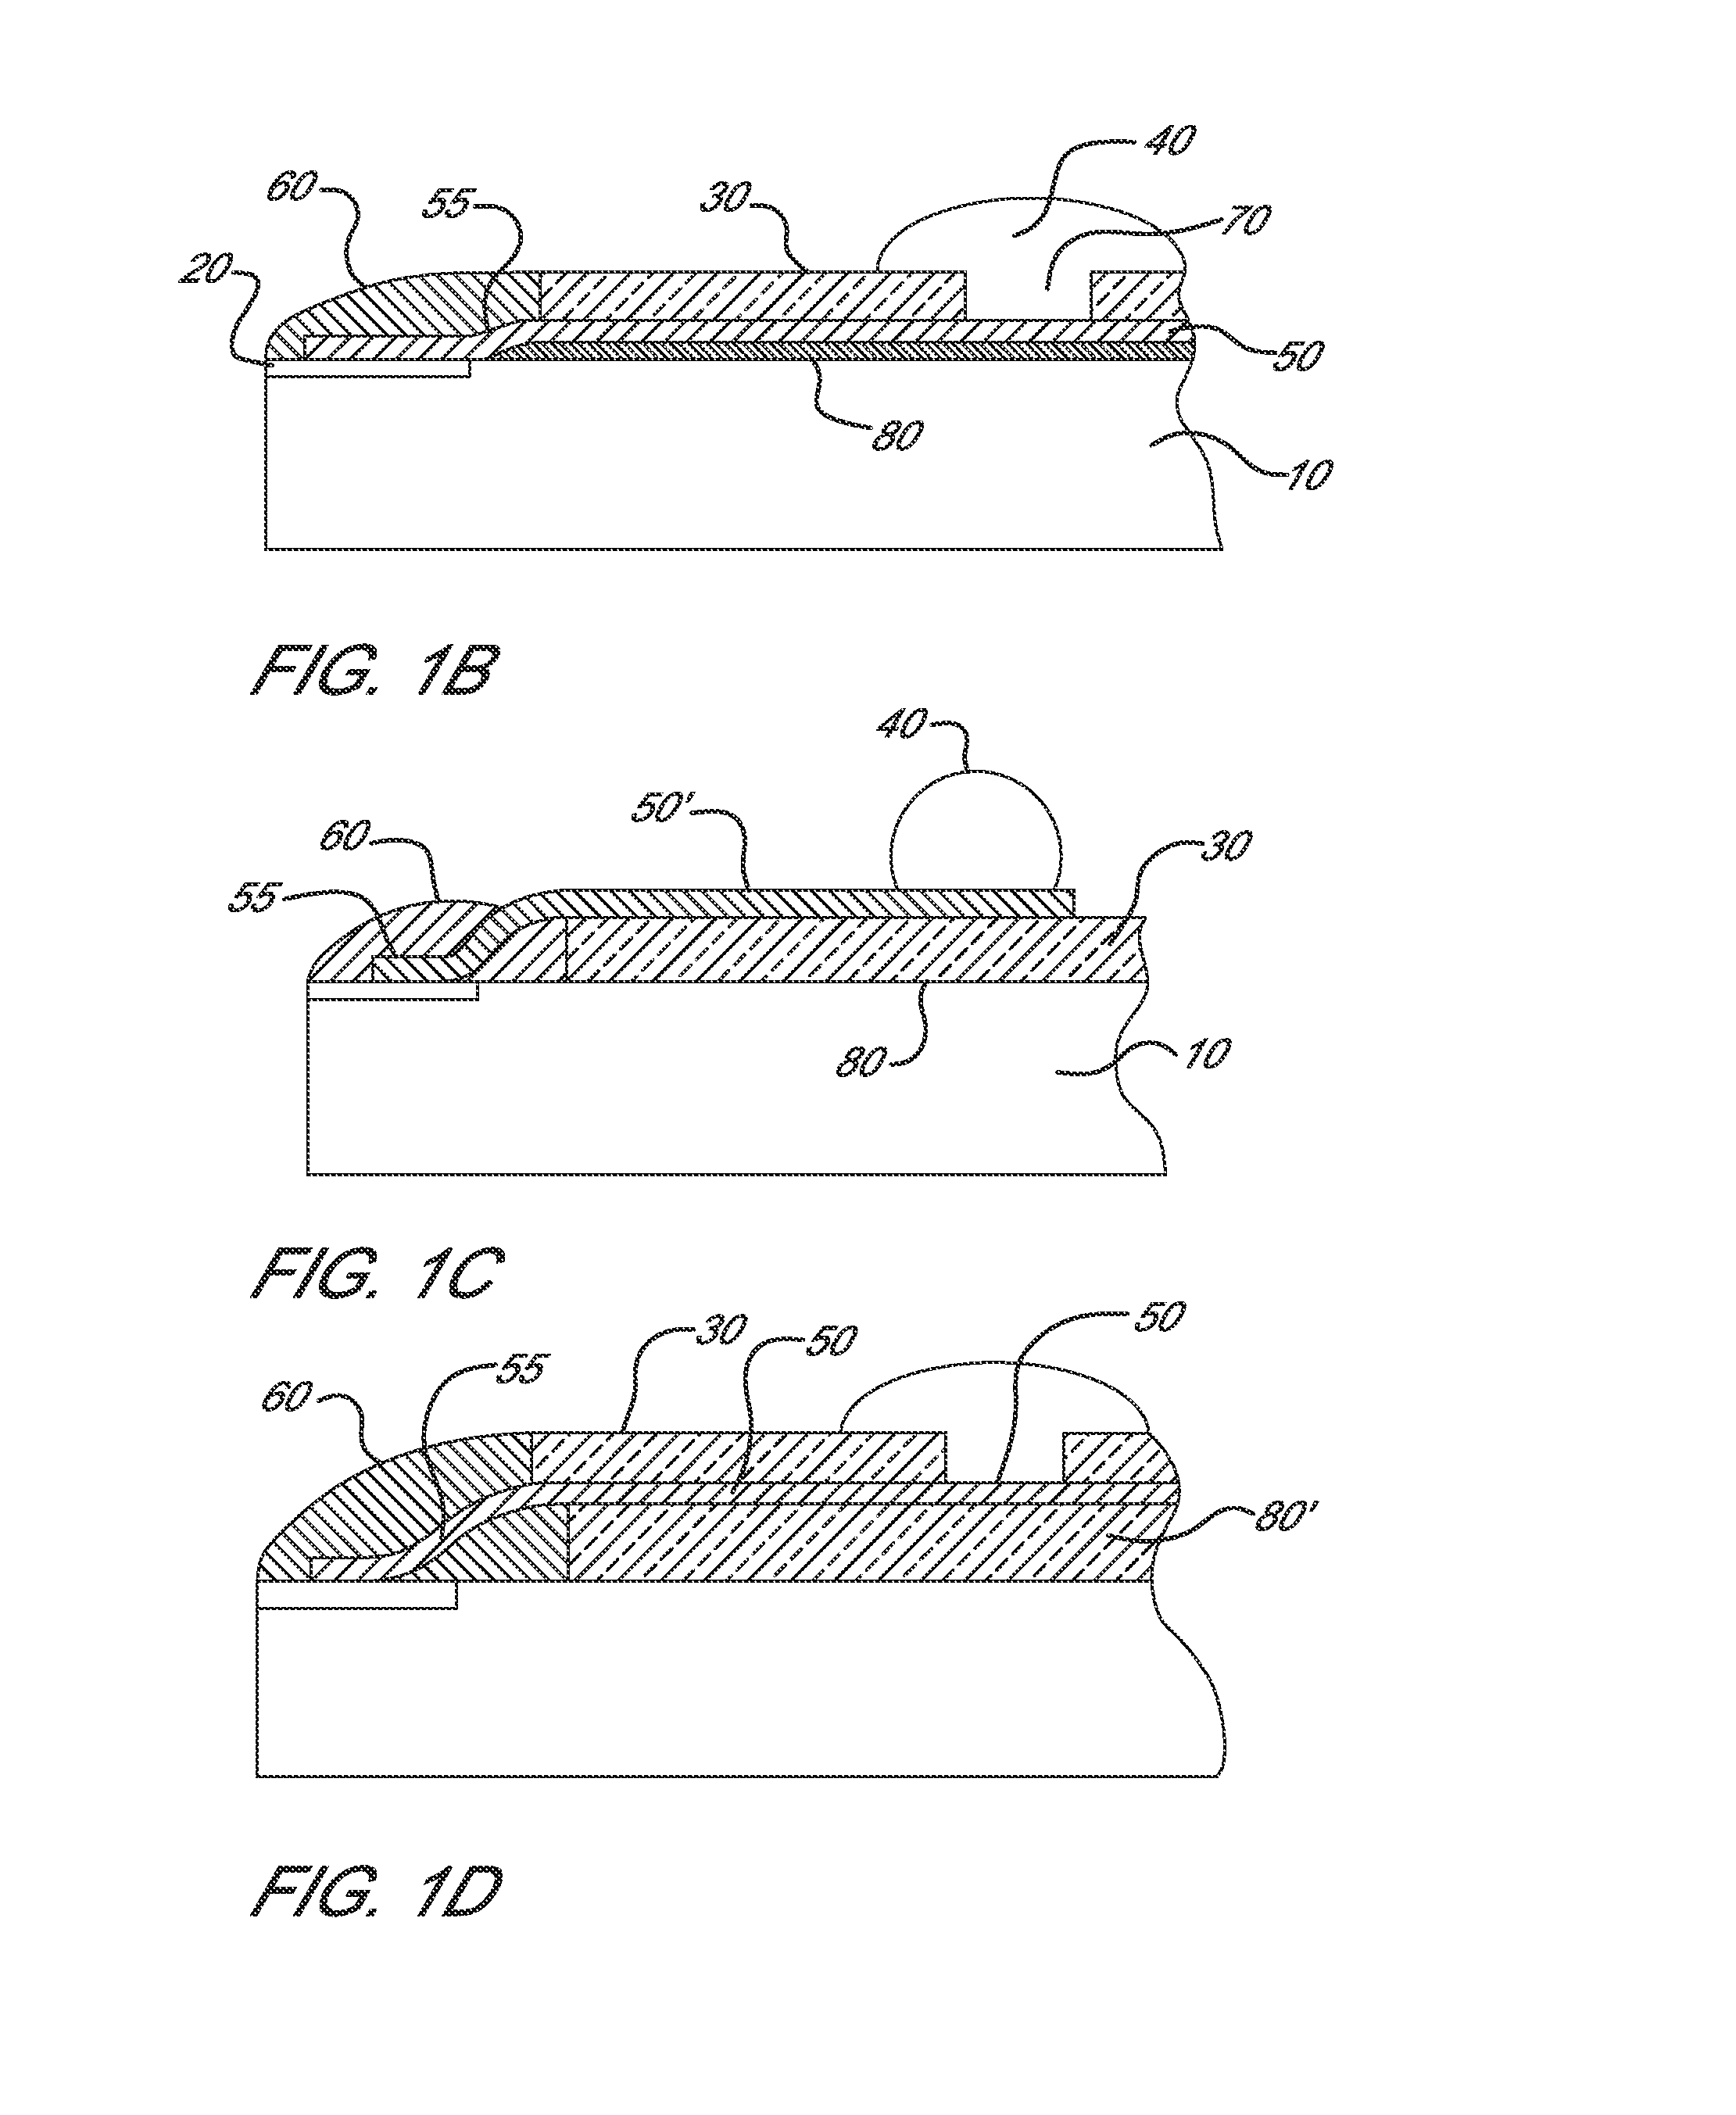 Interposer films useful in semiconductor packaging applications, and methods relating thereto